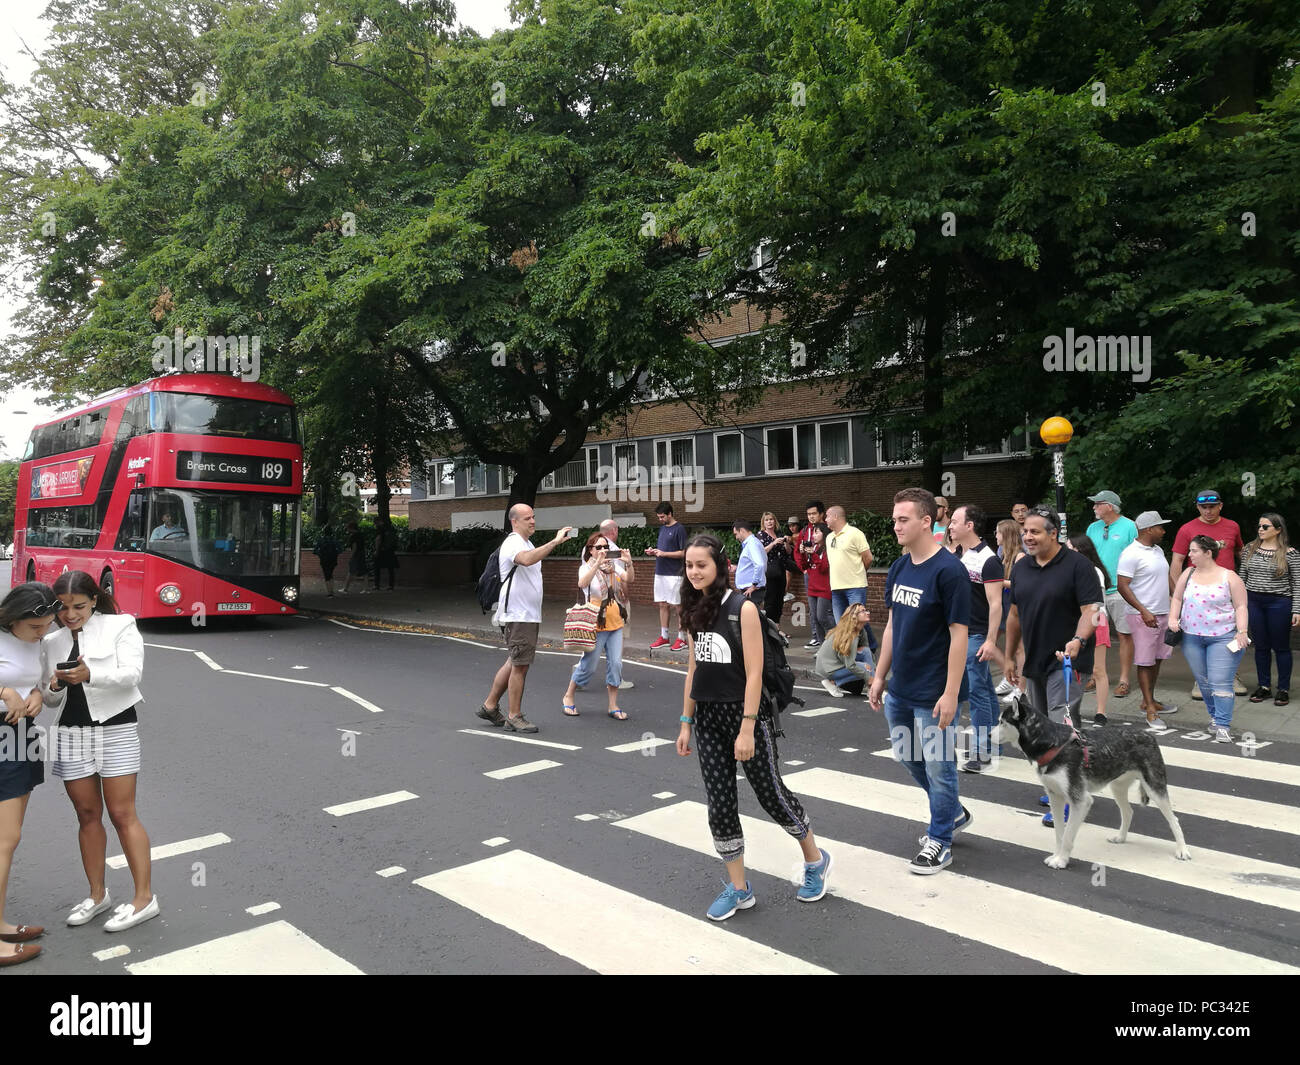 Crowds of tourists pose for photos on the zebra crossing on Abbey Road, London, NW8, July 2018. The Beatles album turns 50 on 26th September, 2019. Stock Photo